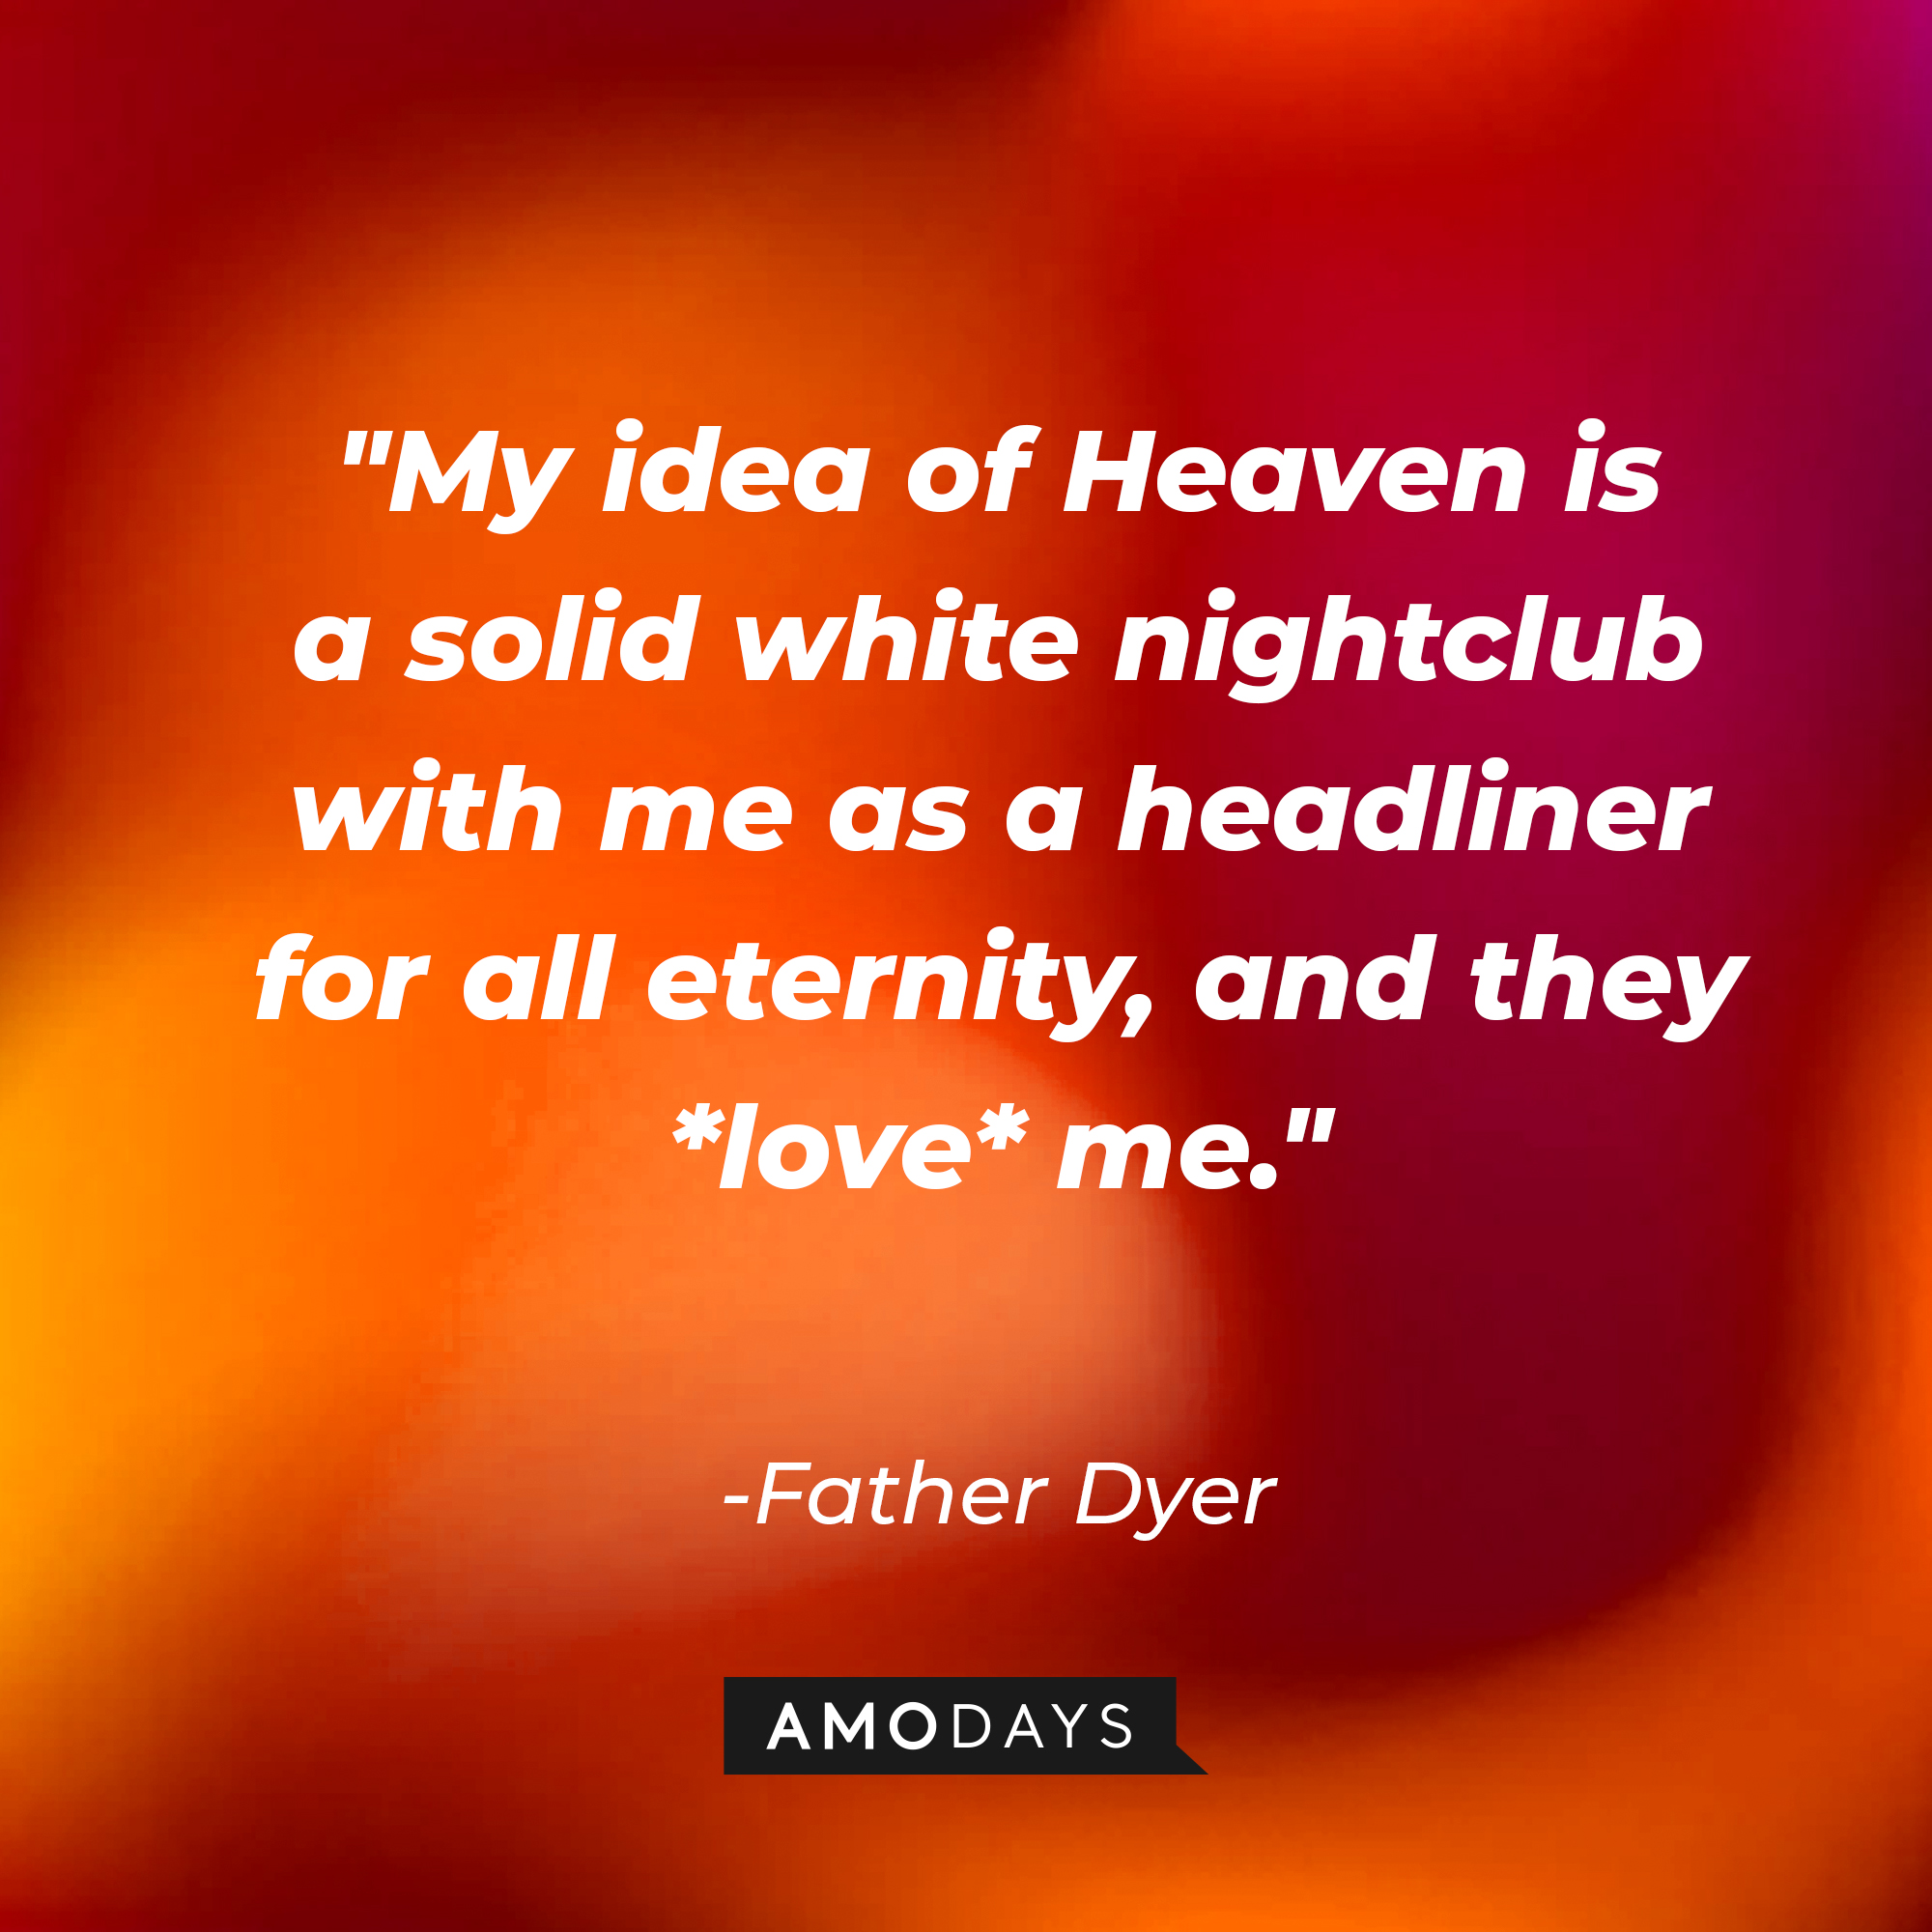 Father Dyer's quote: "My idea of Heaven is a solid white nightclub with me as a headliner for all eternity, and they *love* me." | Source: AmoDAys